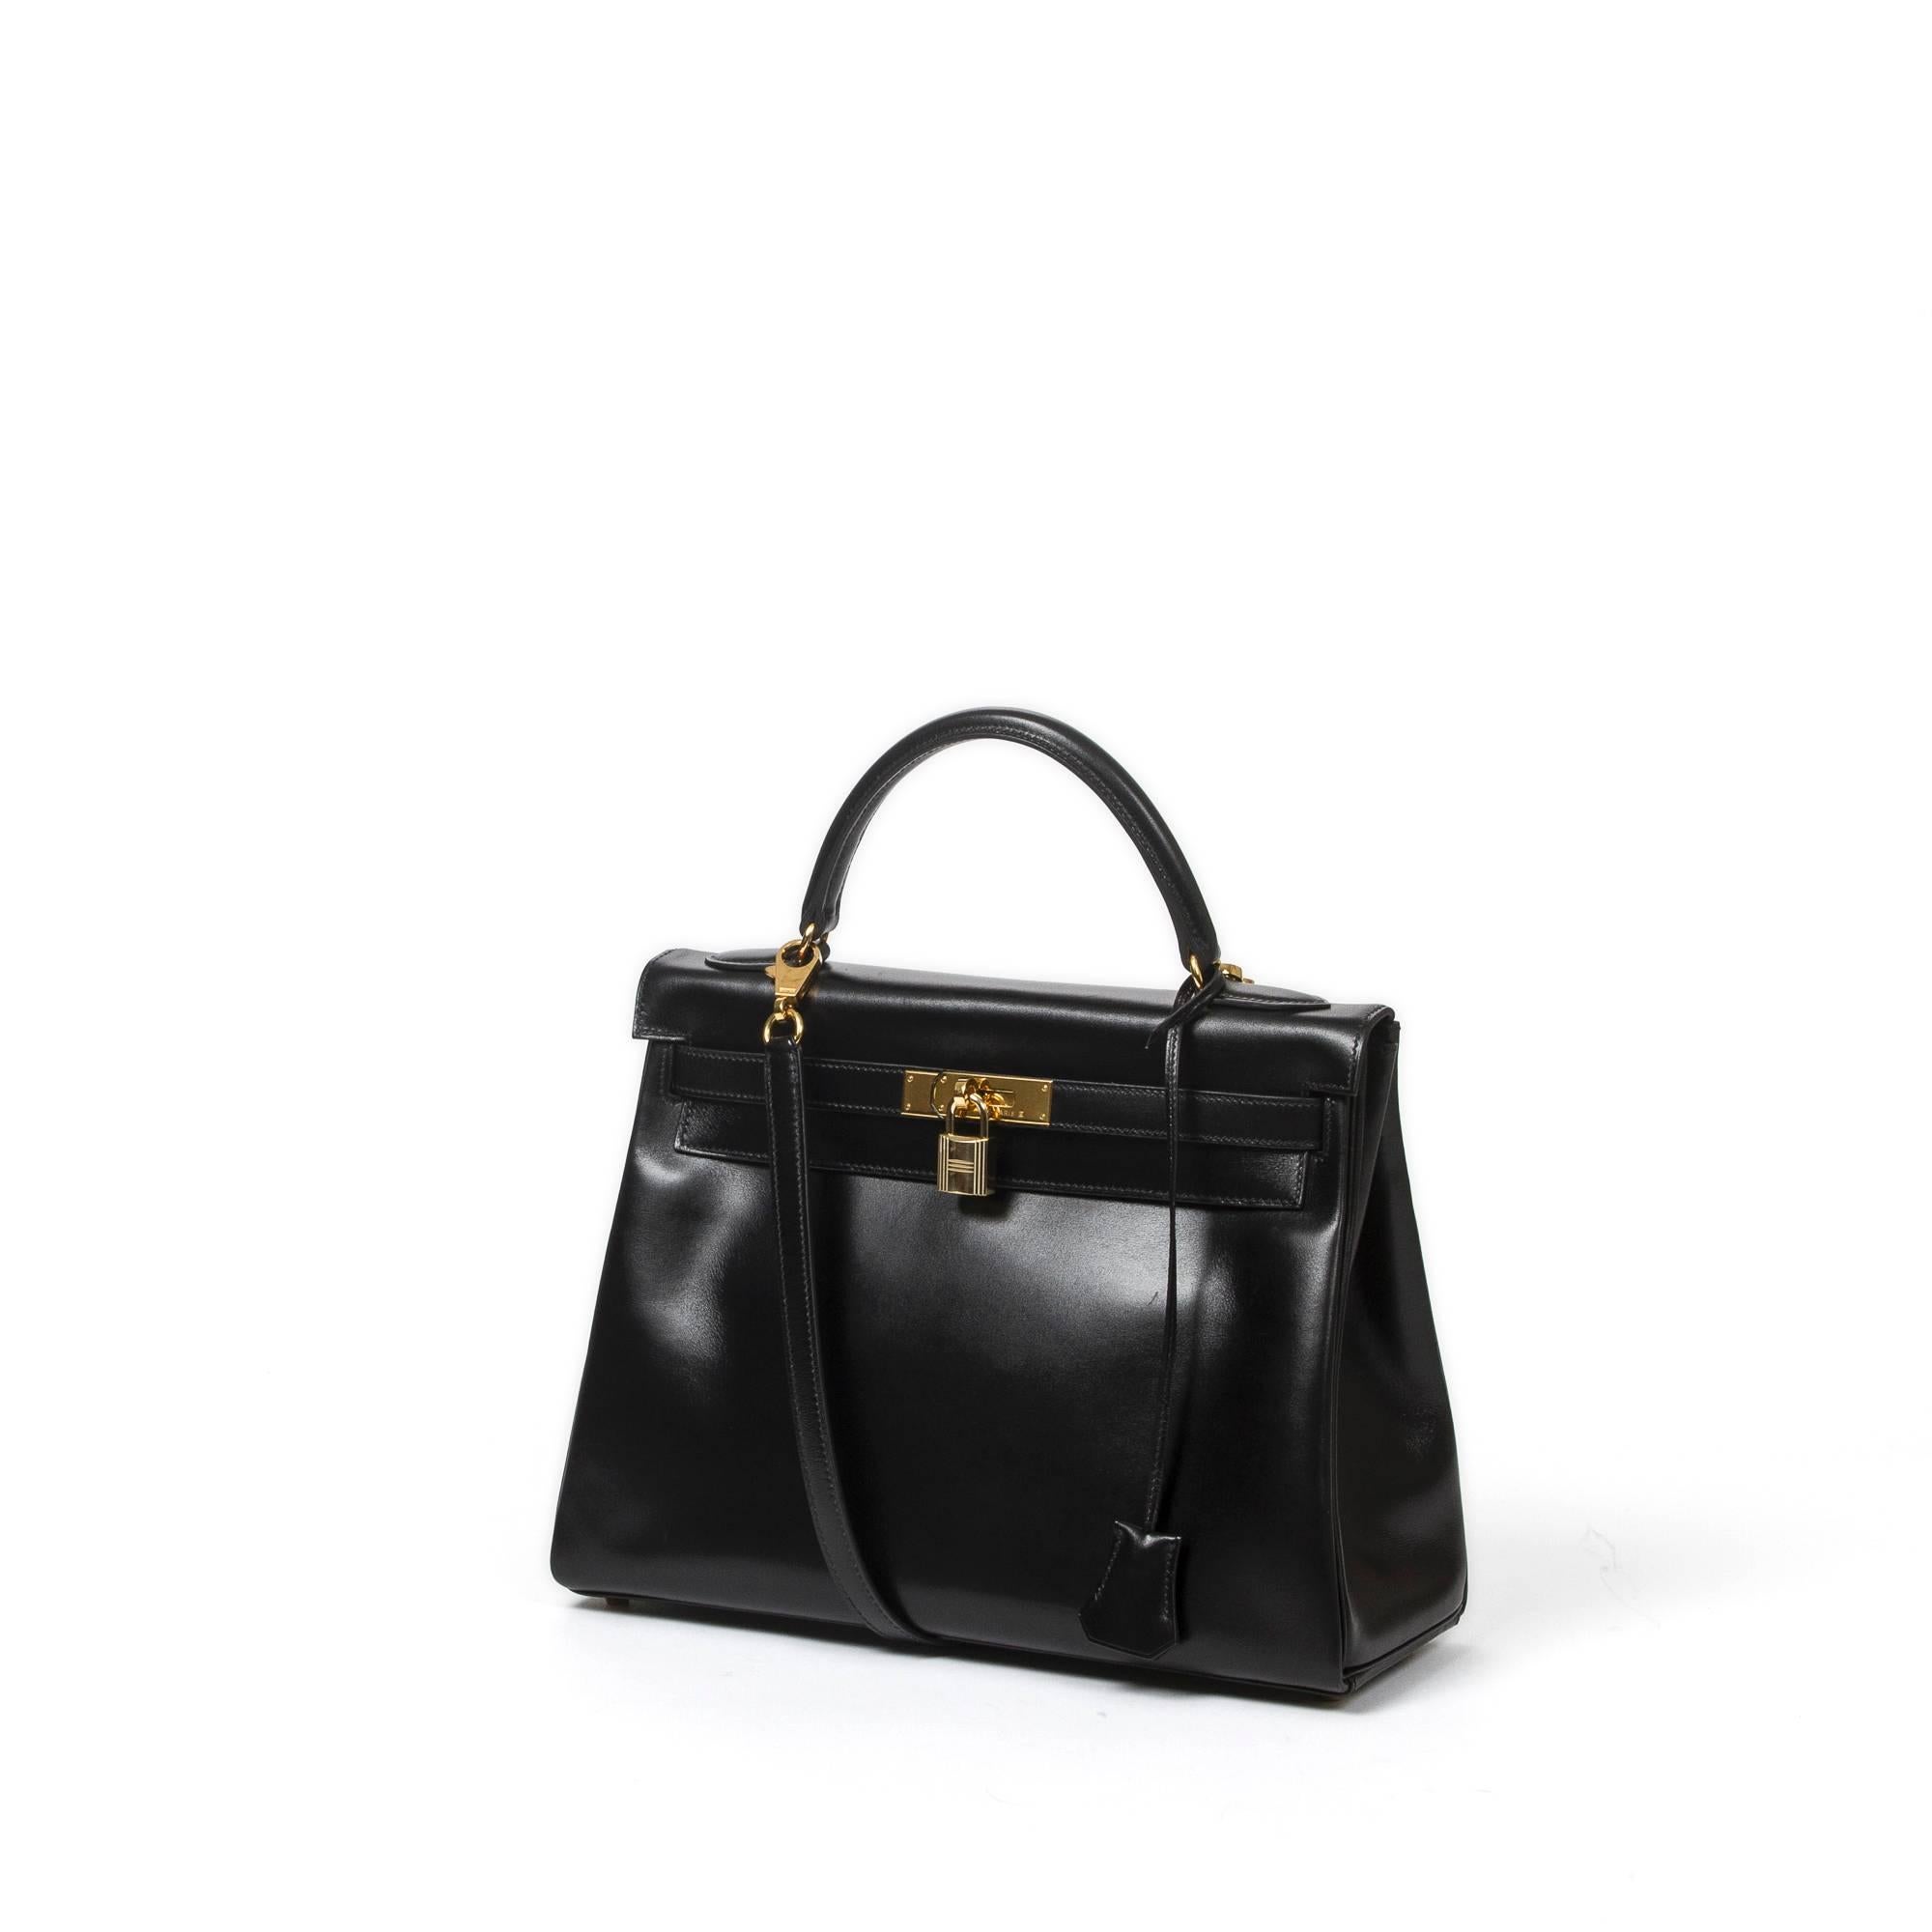 Hermès Kelly Retourné 32cm Black Box Leather In Excellent Condition For Sale In Dublin, IE